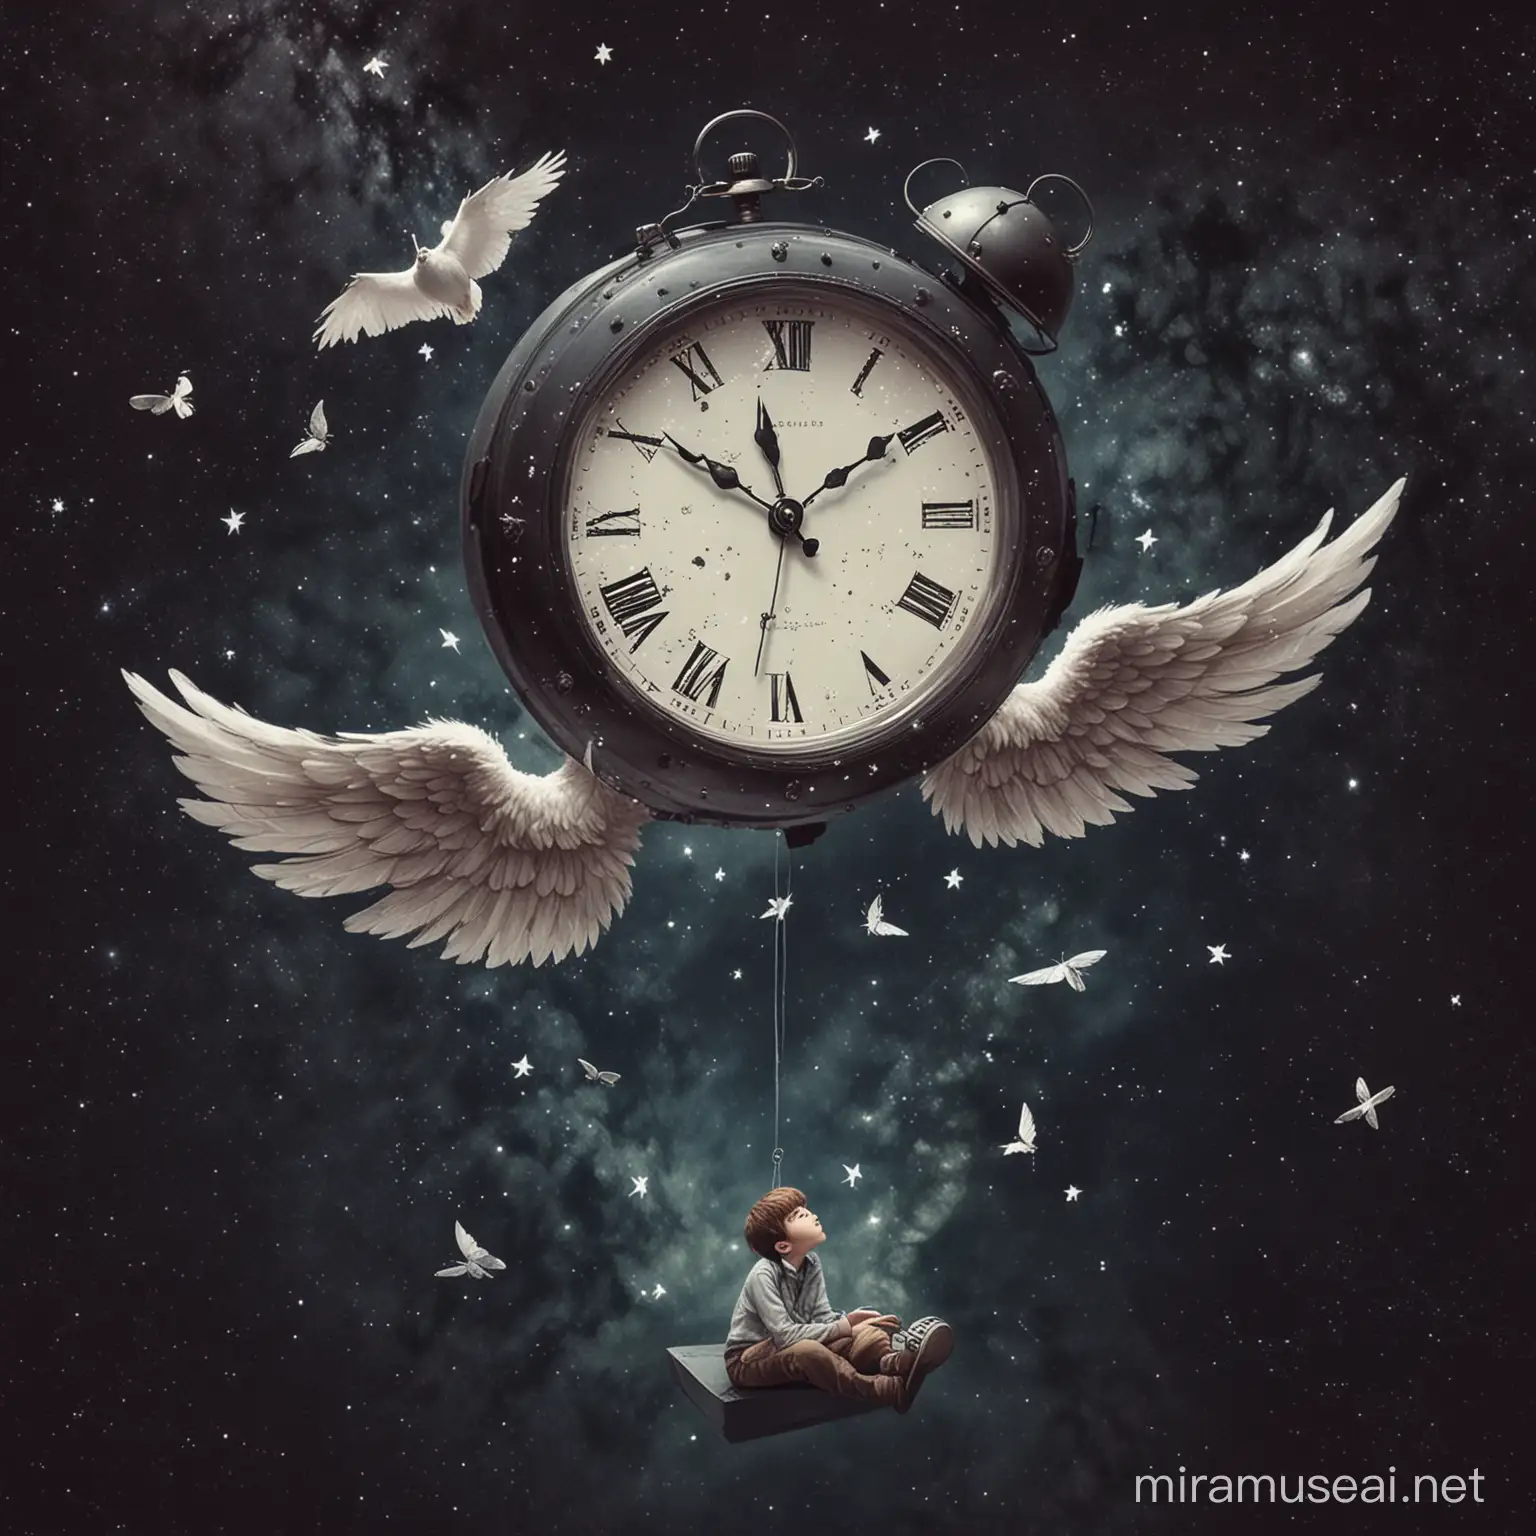 Lonely Angel Boy Gazing at Floating Clock in Infinite Space